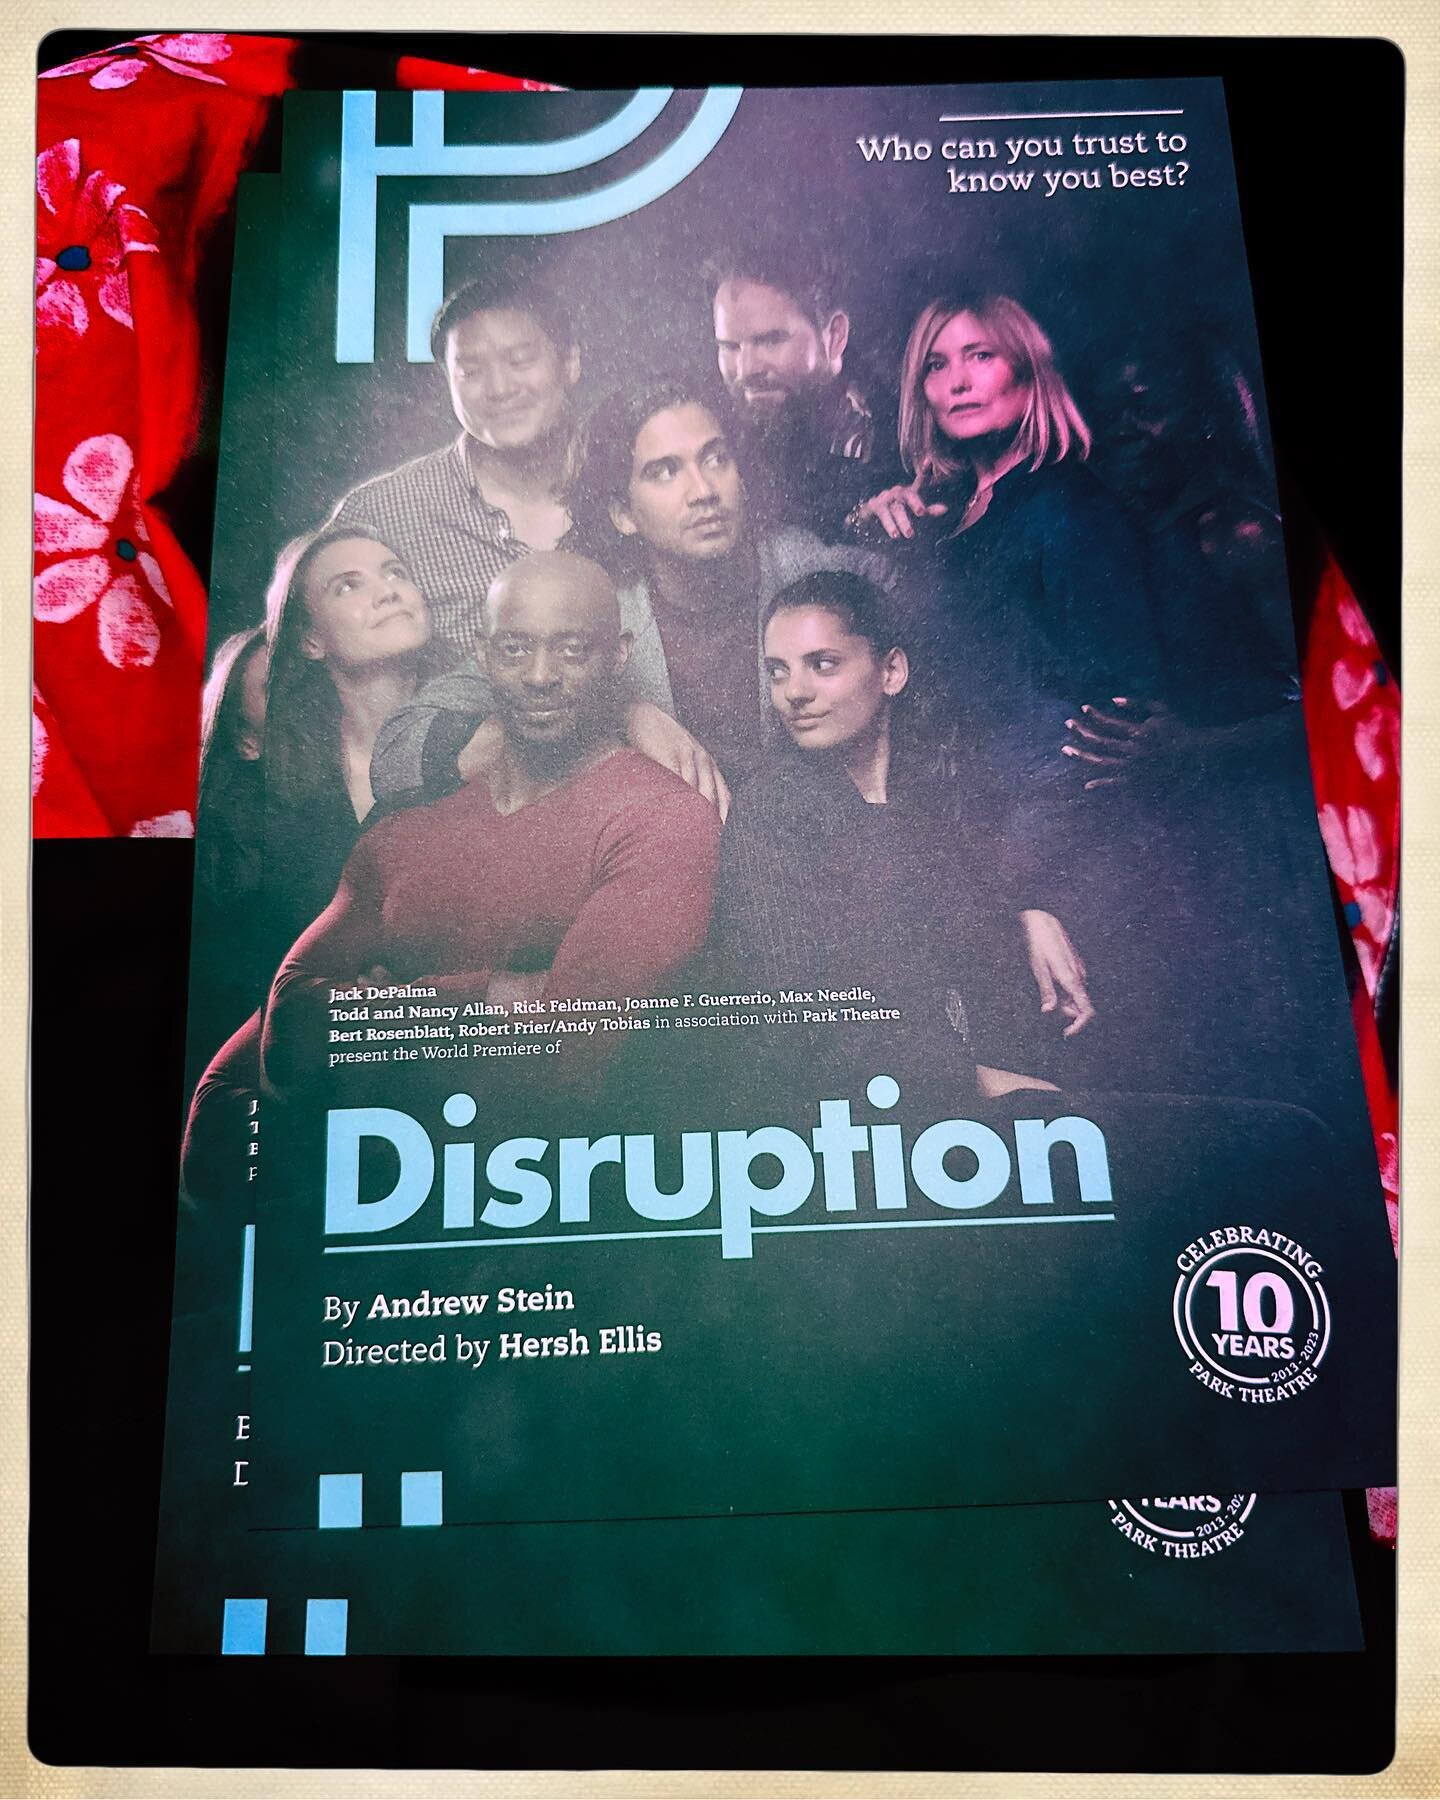 Last night&rsquo;s #premiere of the #play we do-produces #disruption timely subject #ai #moralambiguity @parktheatrelondon runs until August 5 #comeondown you won&rsquo;t be sorry